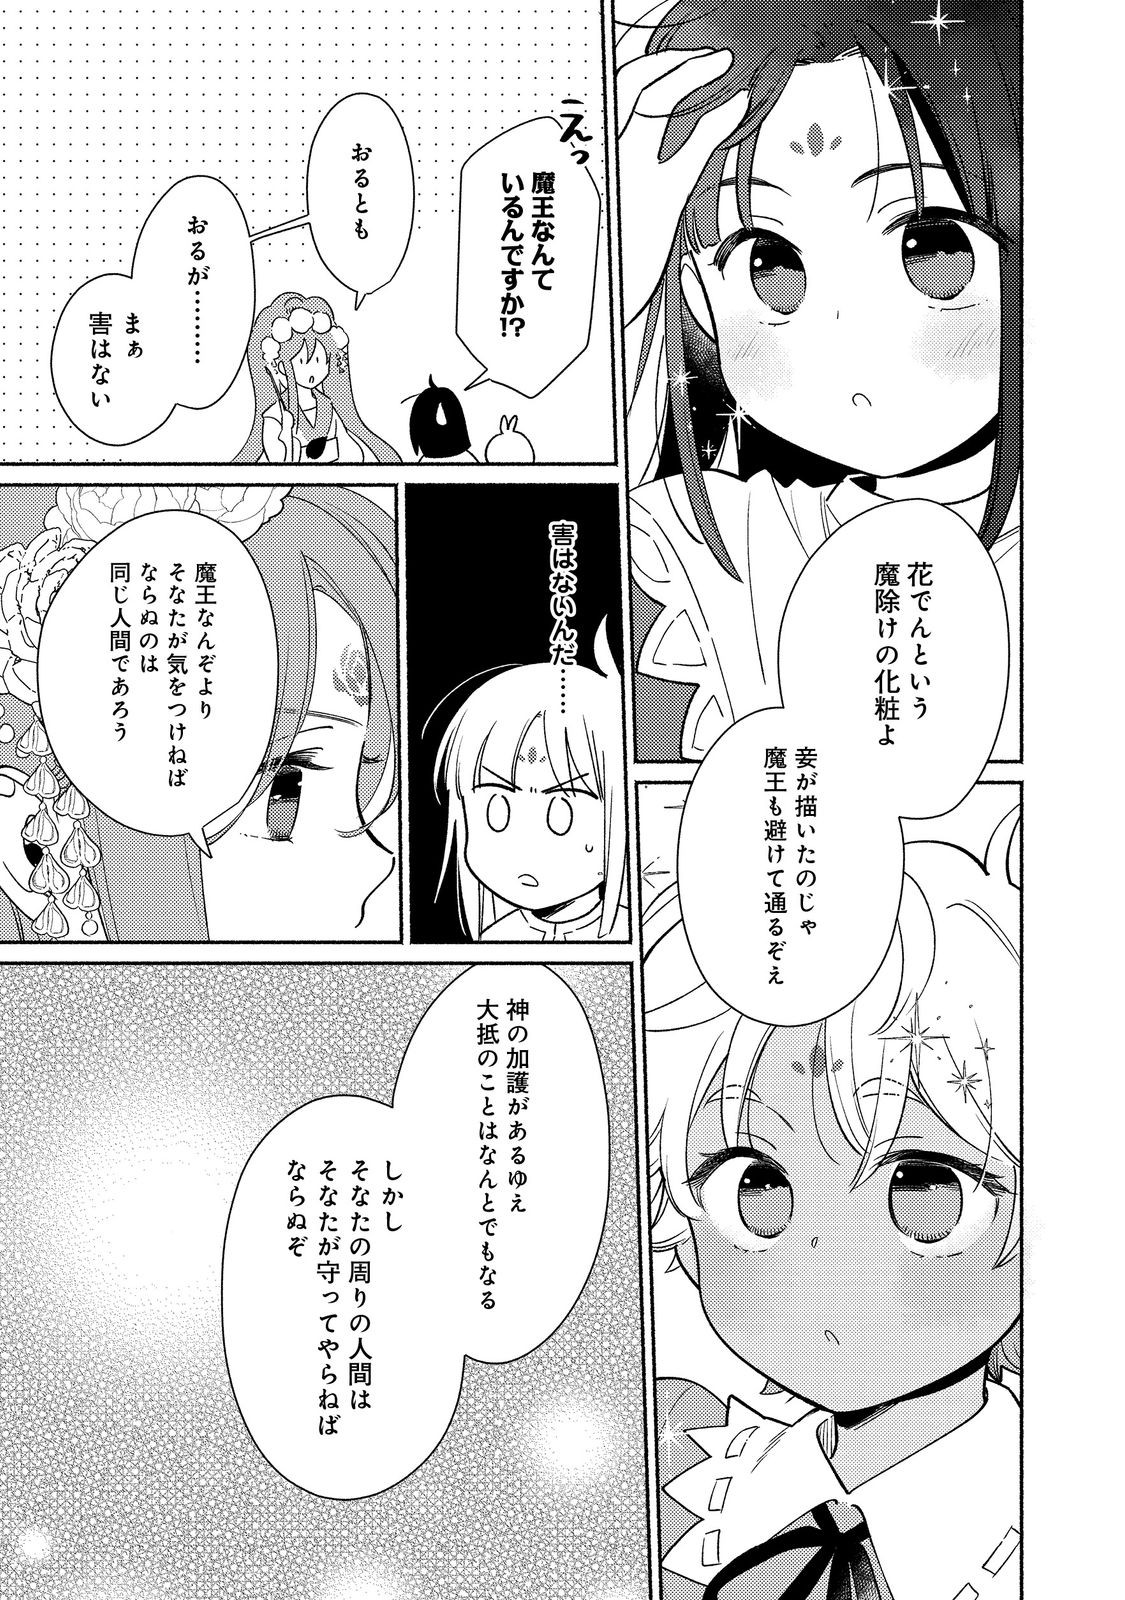 I’m the White Pig Nobleman 第20.2話 - Page 16